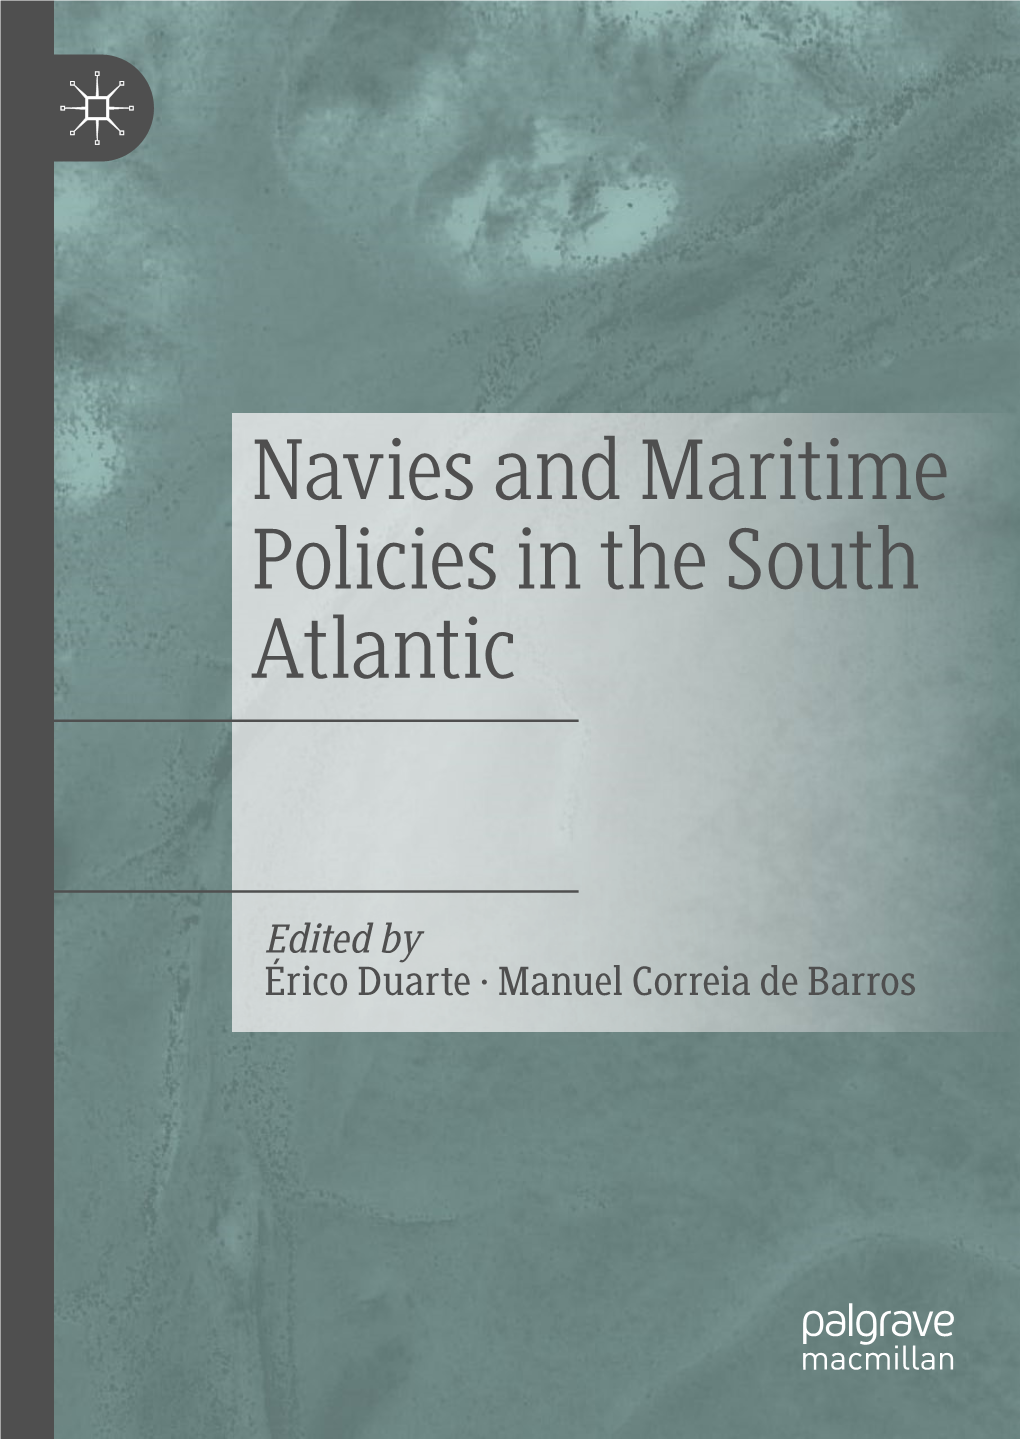 Navies and Maritime Policies in the South Atlantic